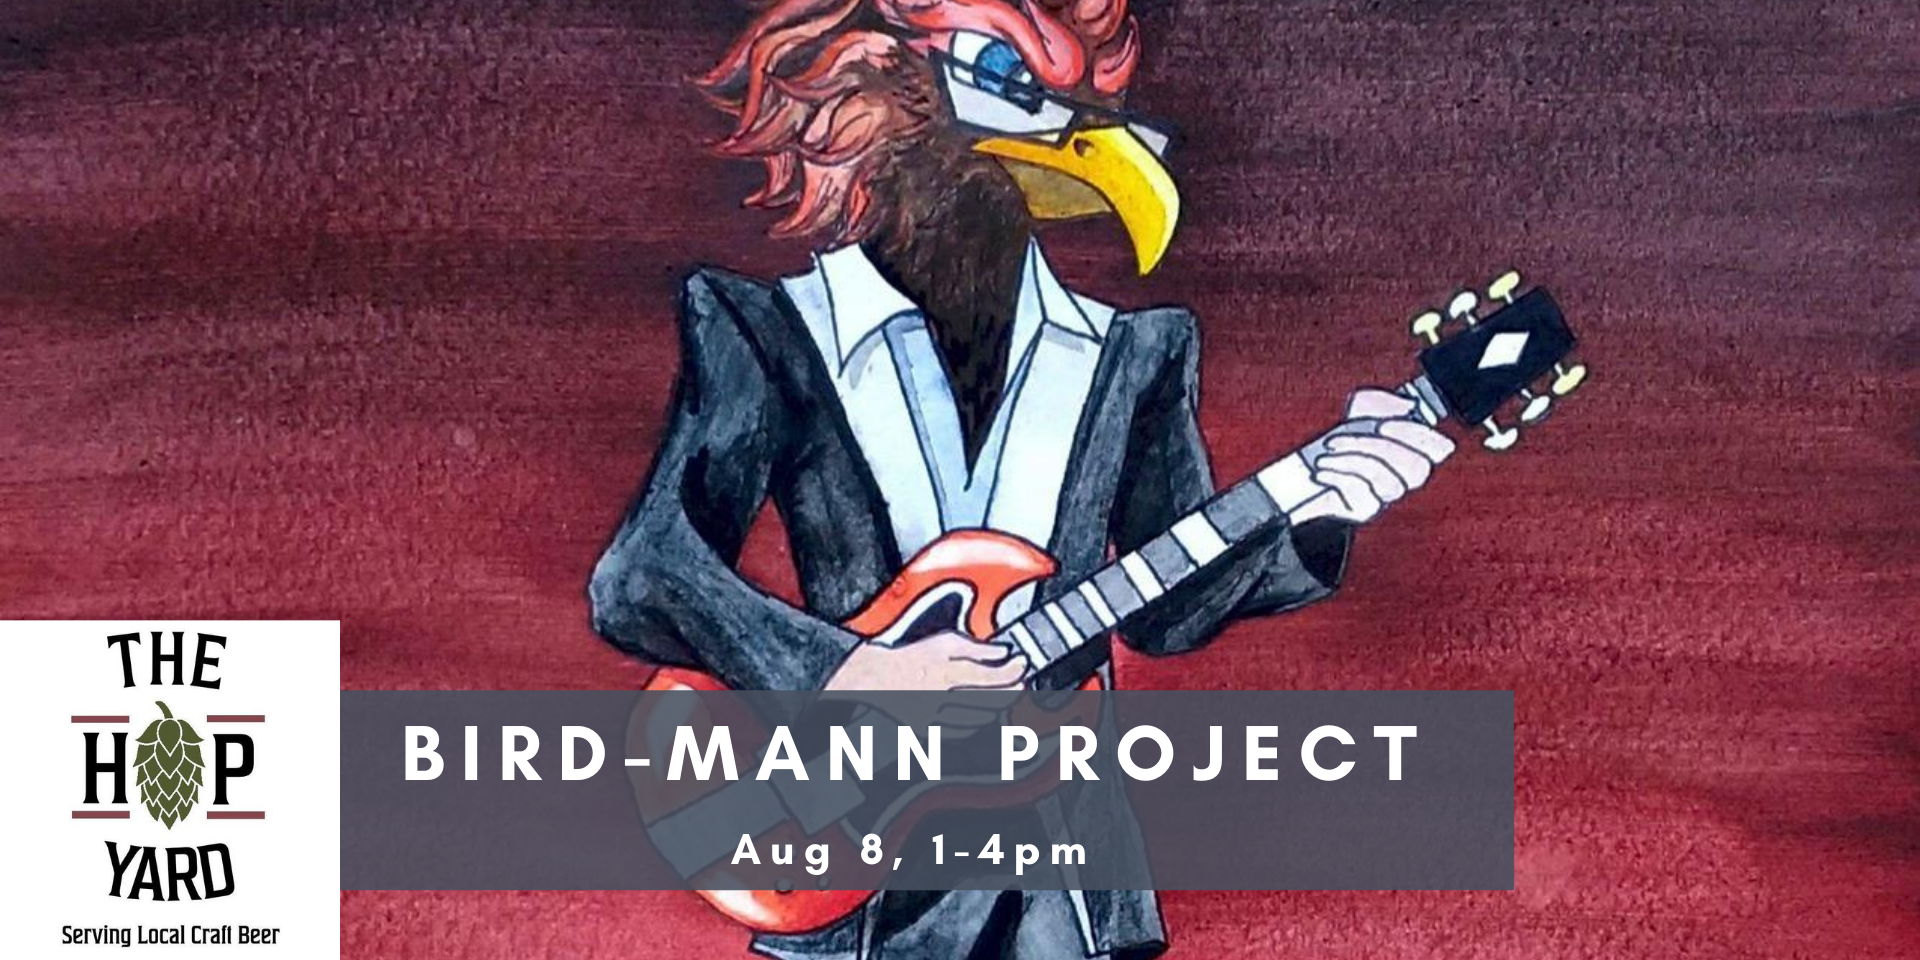 Bird-Mann Project at The Hop Yard promotional image